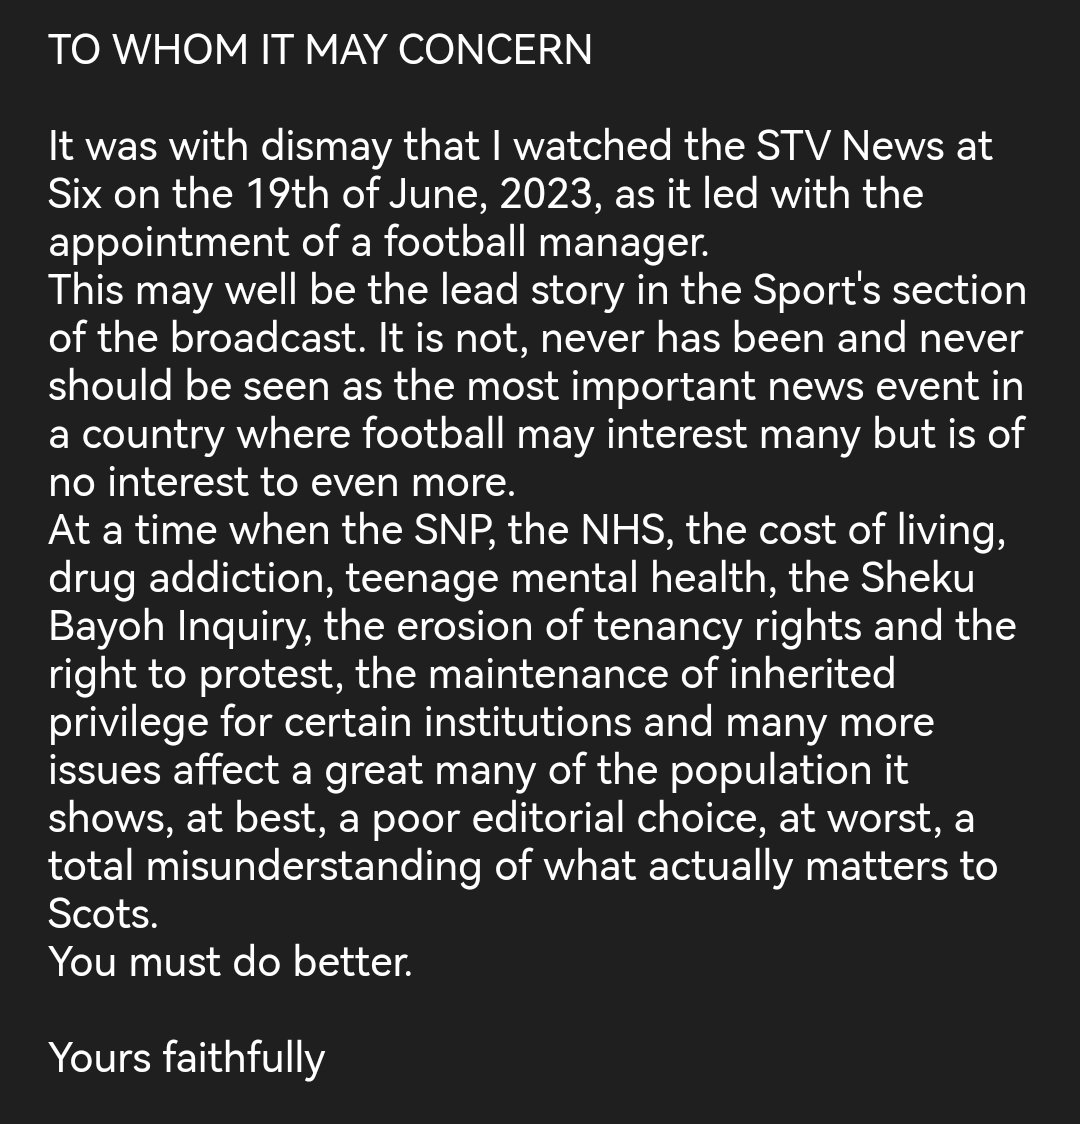 It's taken me a day but this is a complaint to STV. #dobetter @STVNews